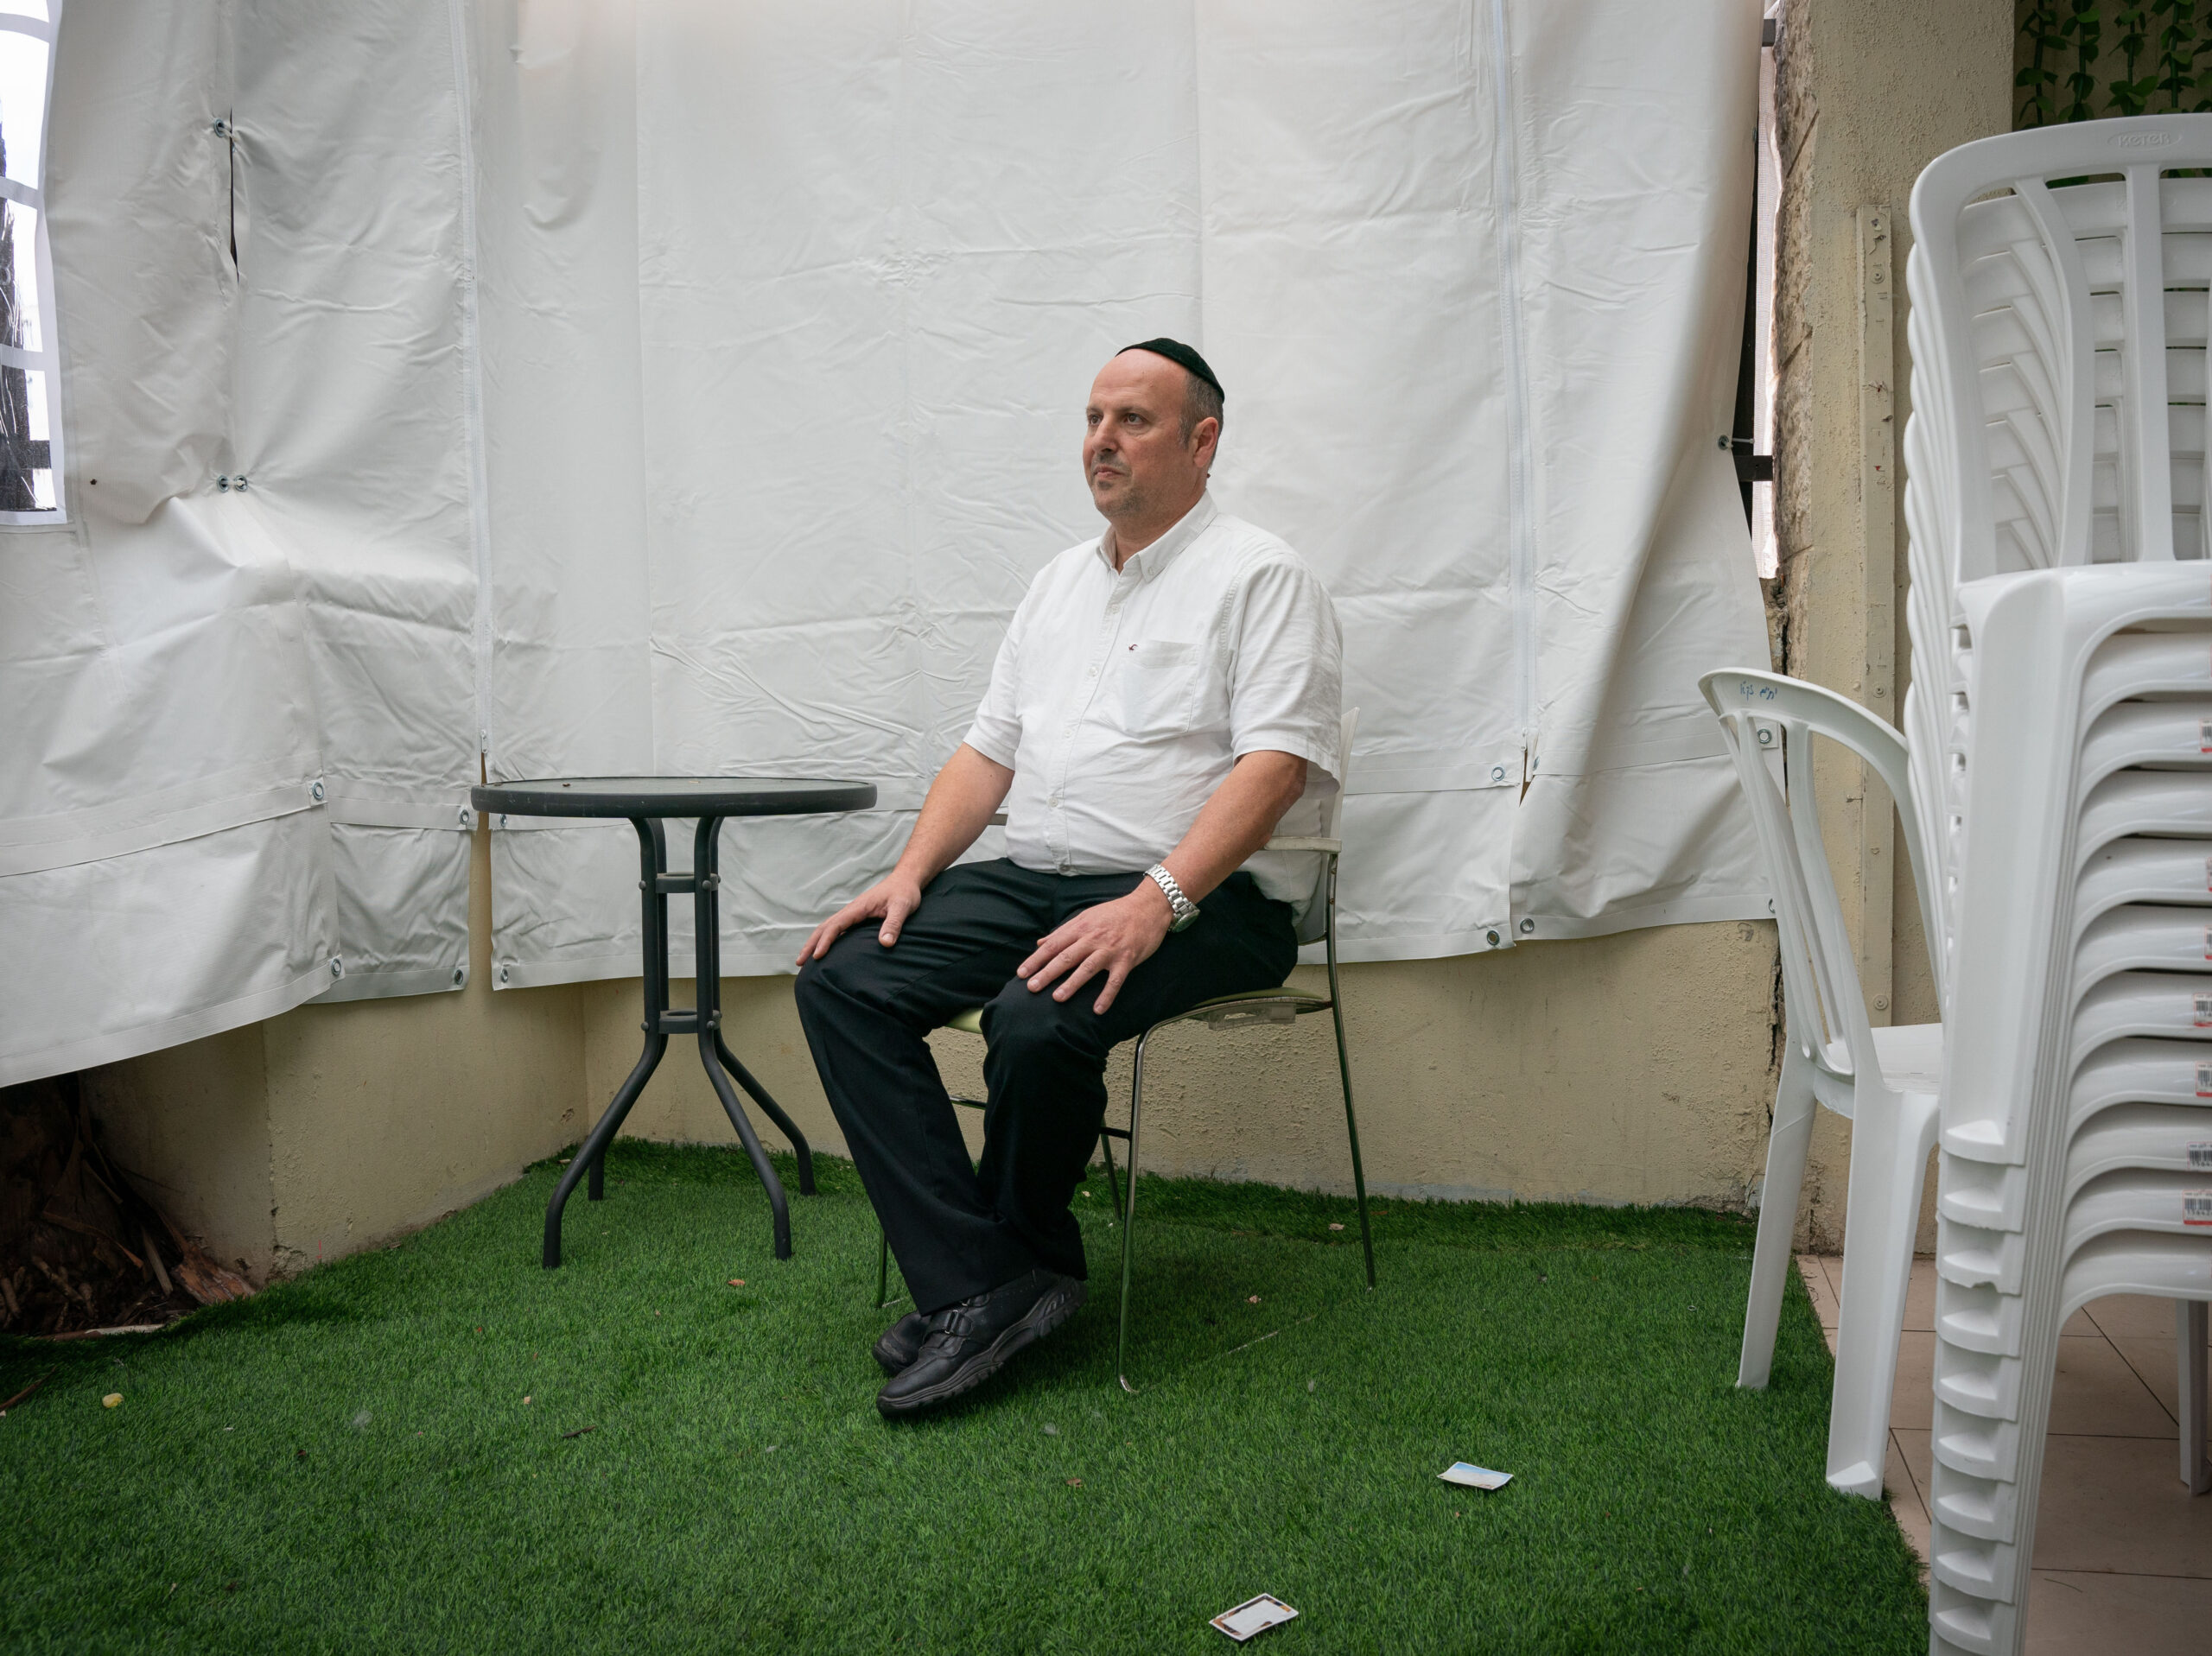 An Israeli responder’s work on Oct. 7 shows the challenges of investigating atrocities